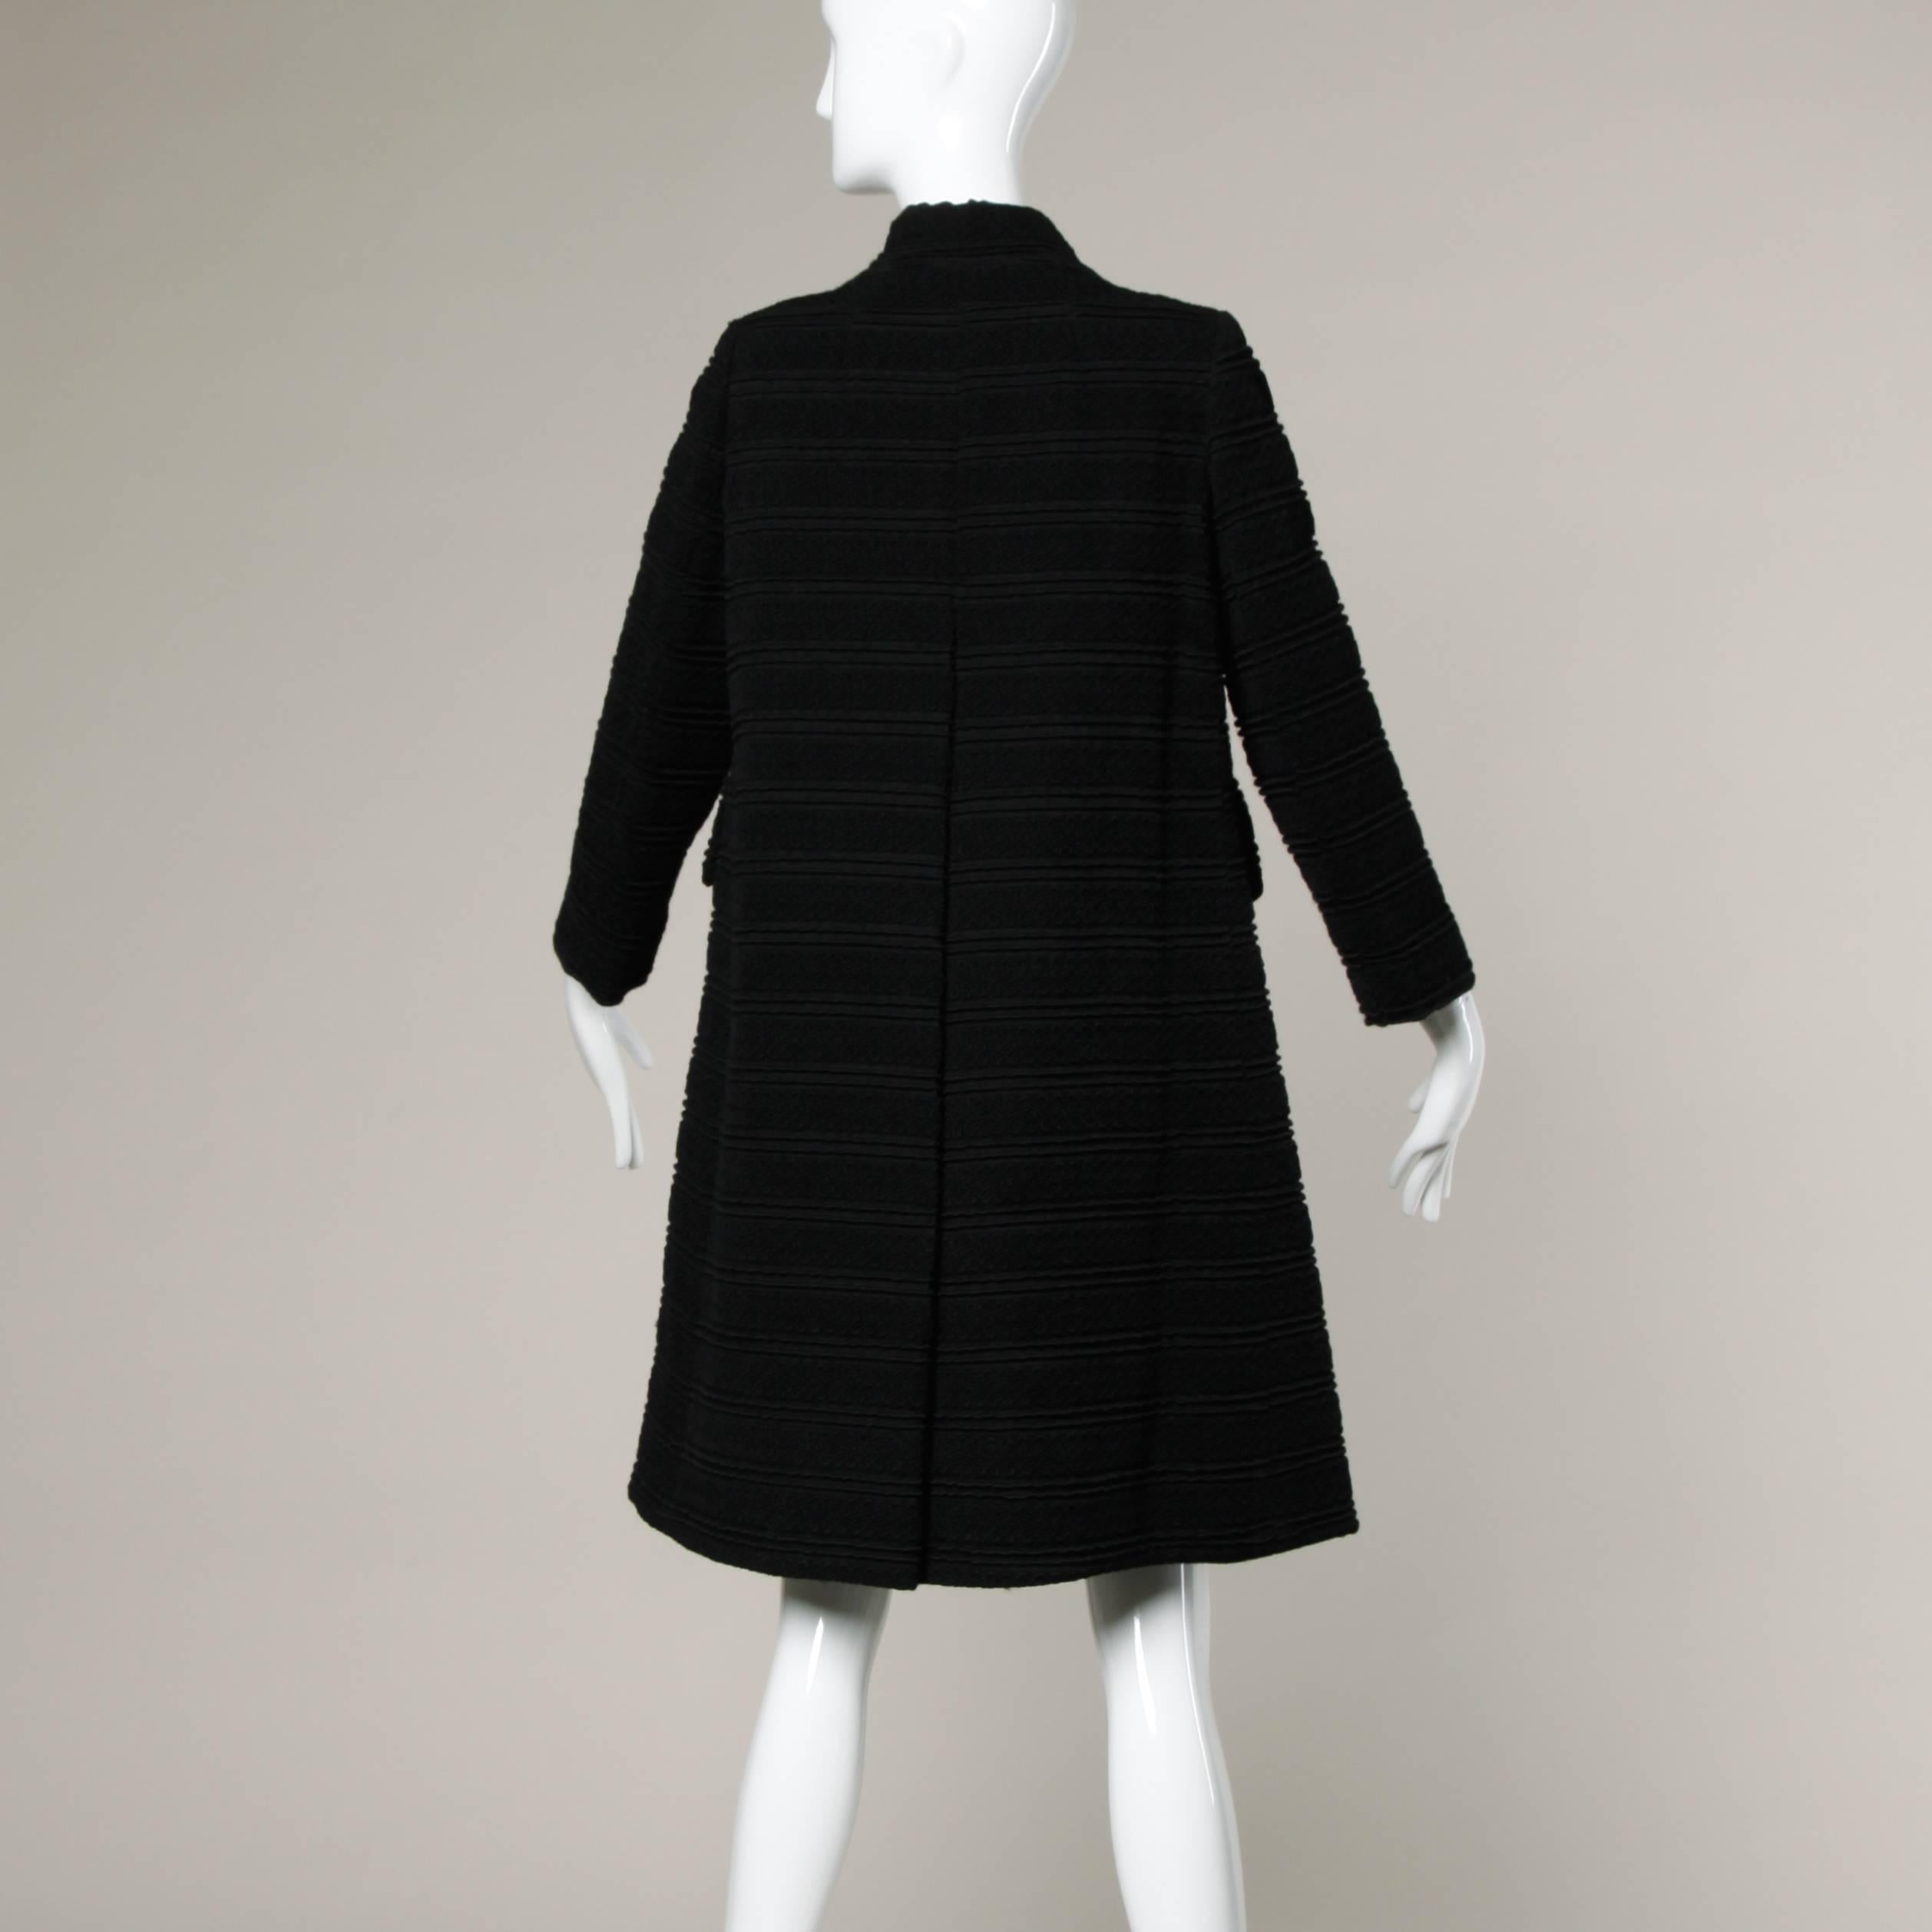 Black 1960s Vintage Wool Mod Coat with Military Chain Detail + Rhinestone Buttons